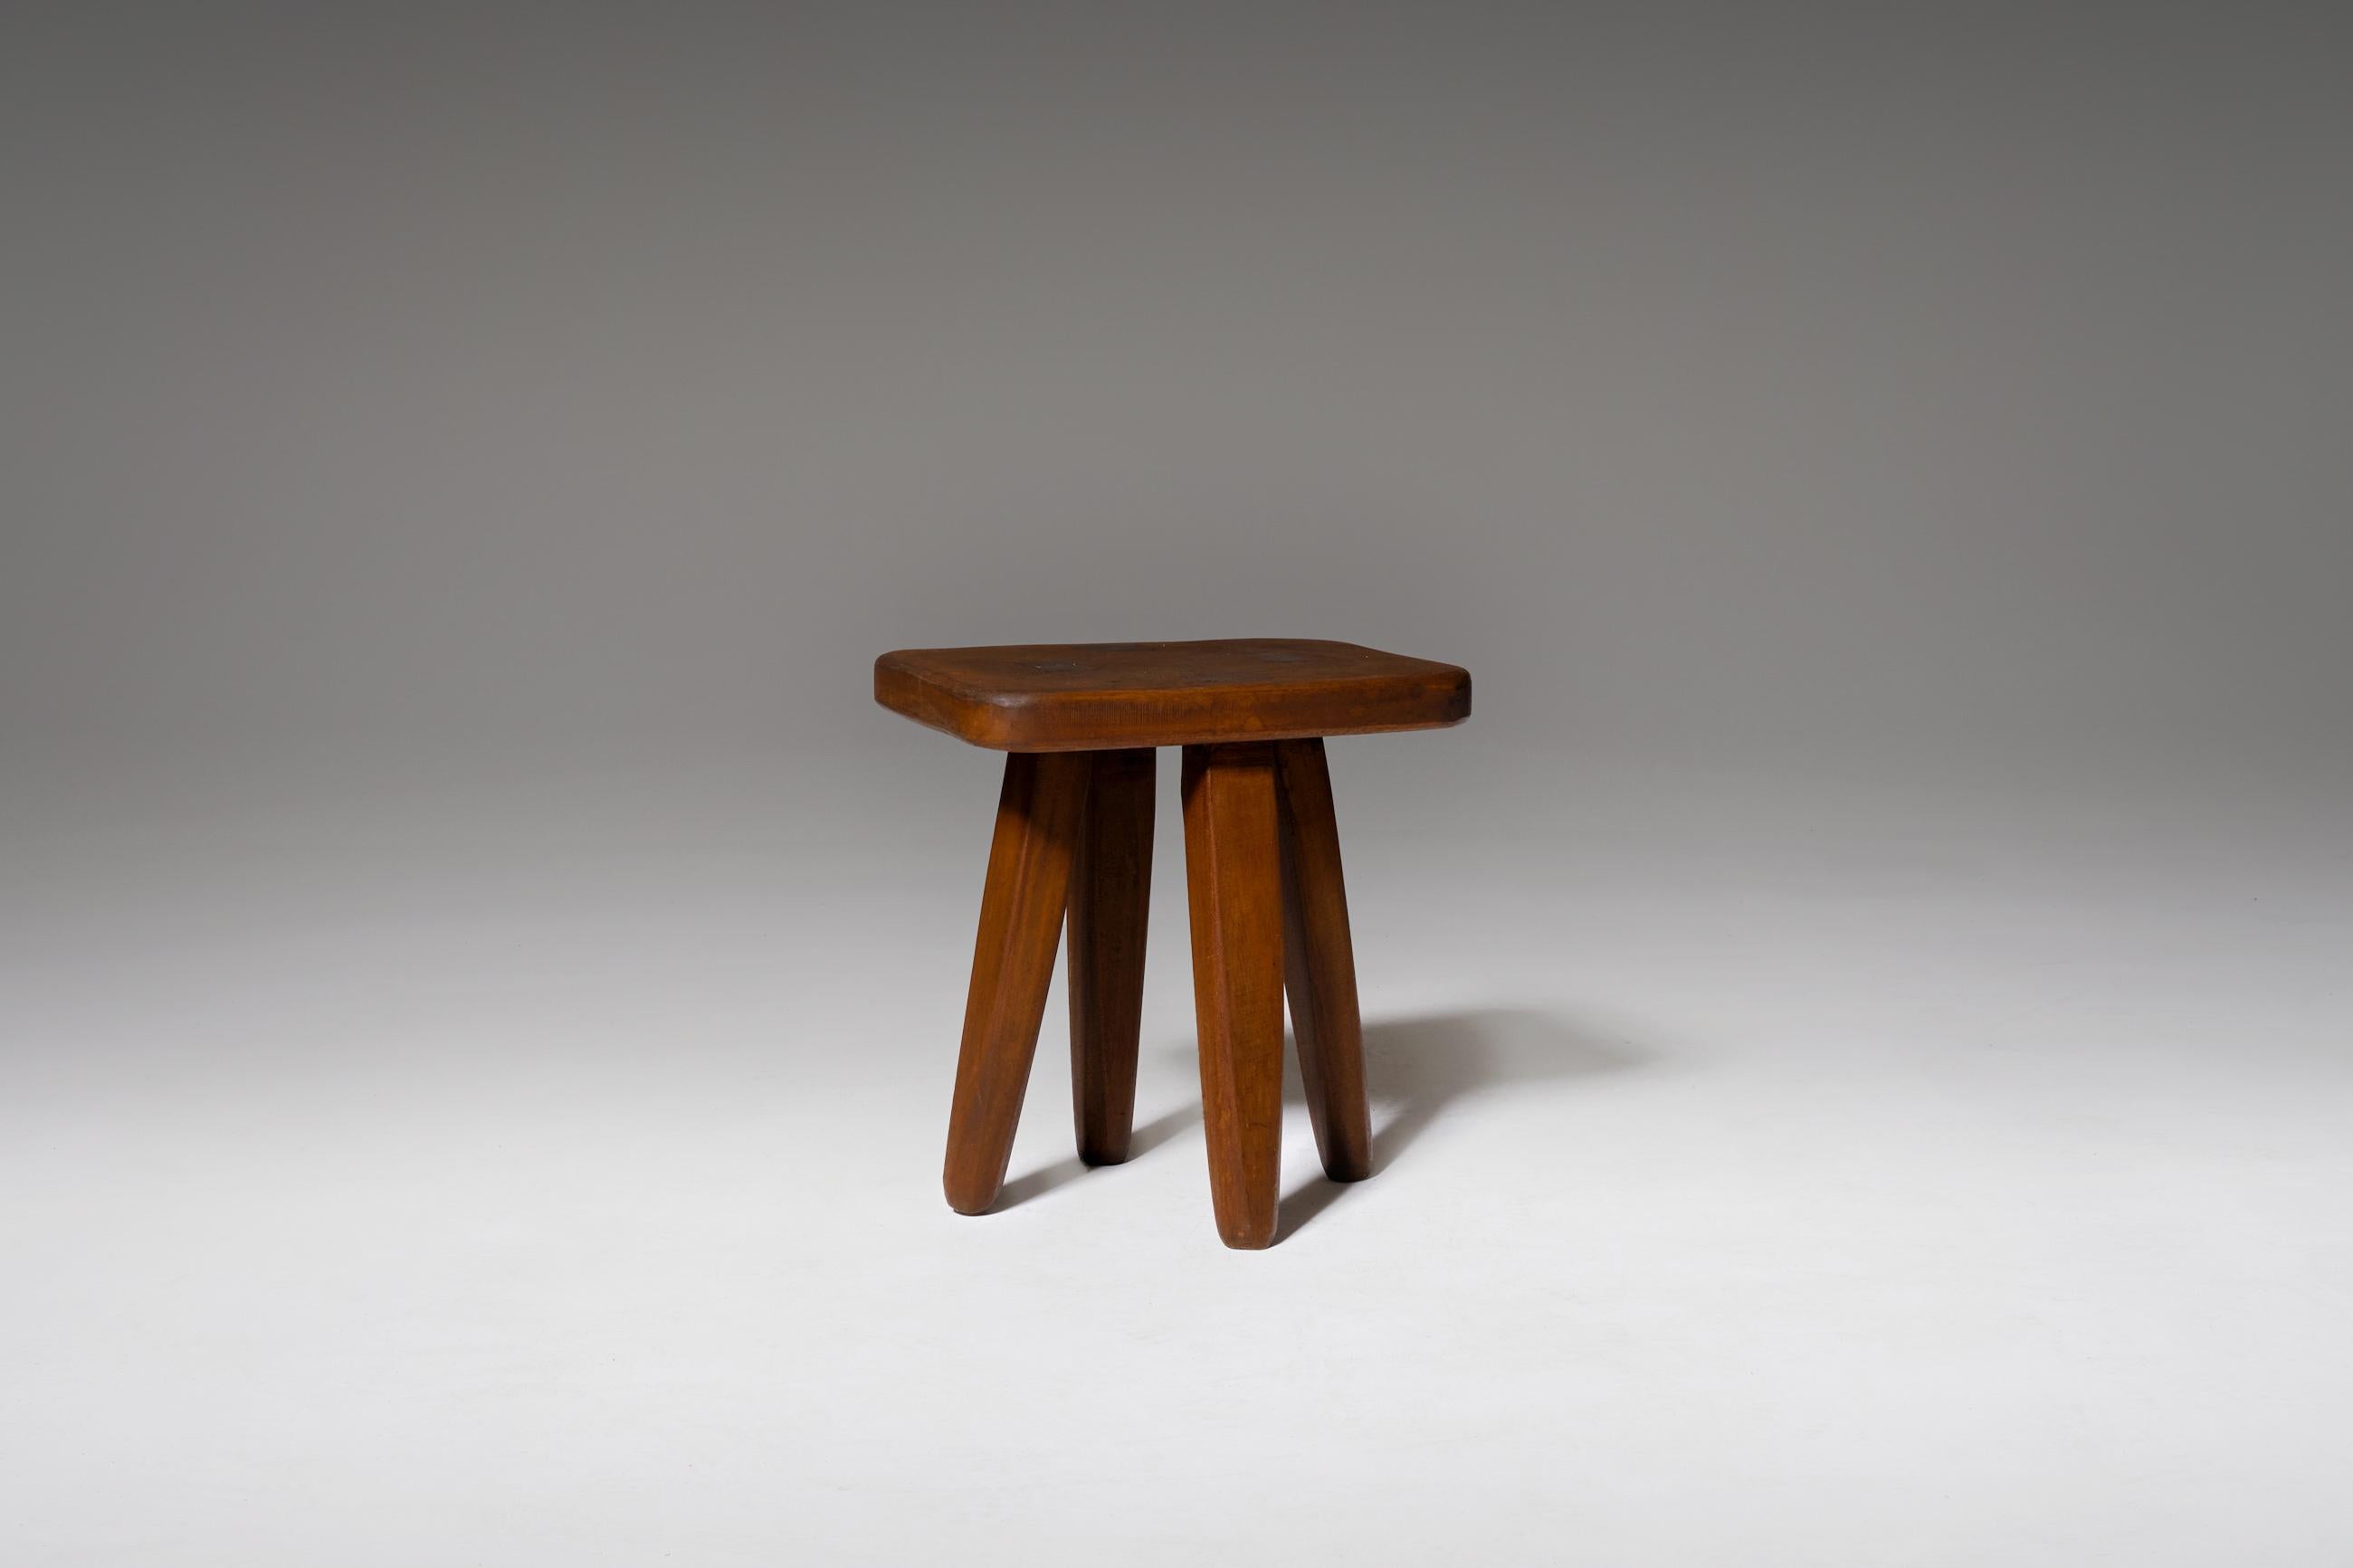 Large French wooden stool, 1960s. Simple and elegant design hand crafted from tropical hardwood. Nice details such as the cut out leg construction, there where the legs comes true the top of the stool. Very stable and solid object. Can be used as a